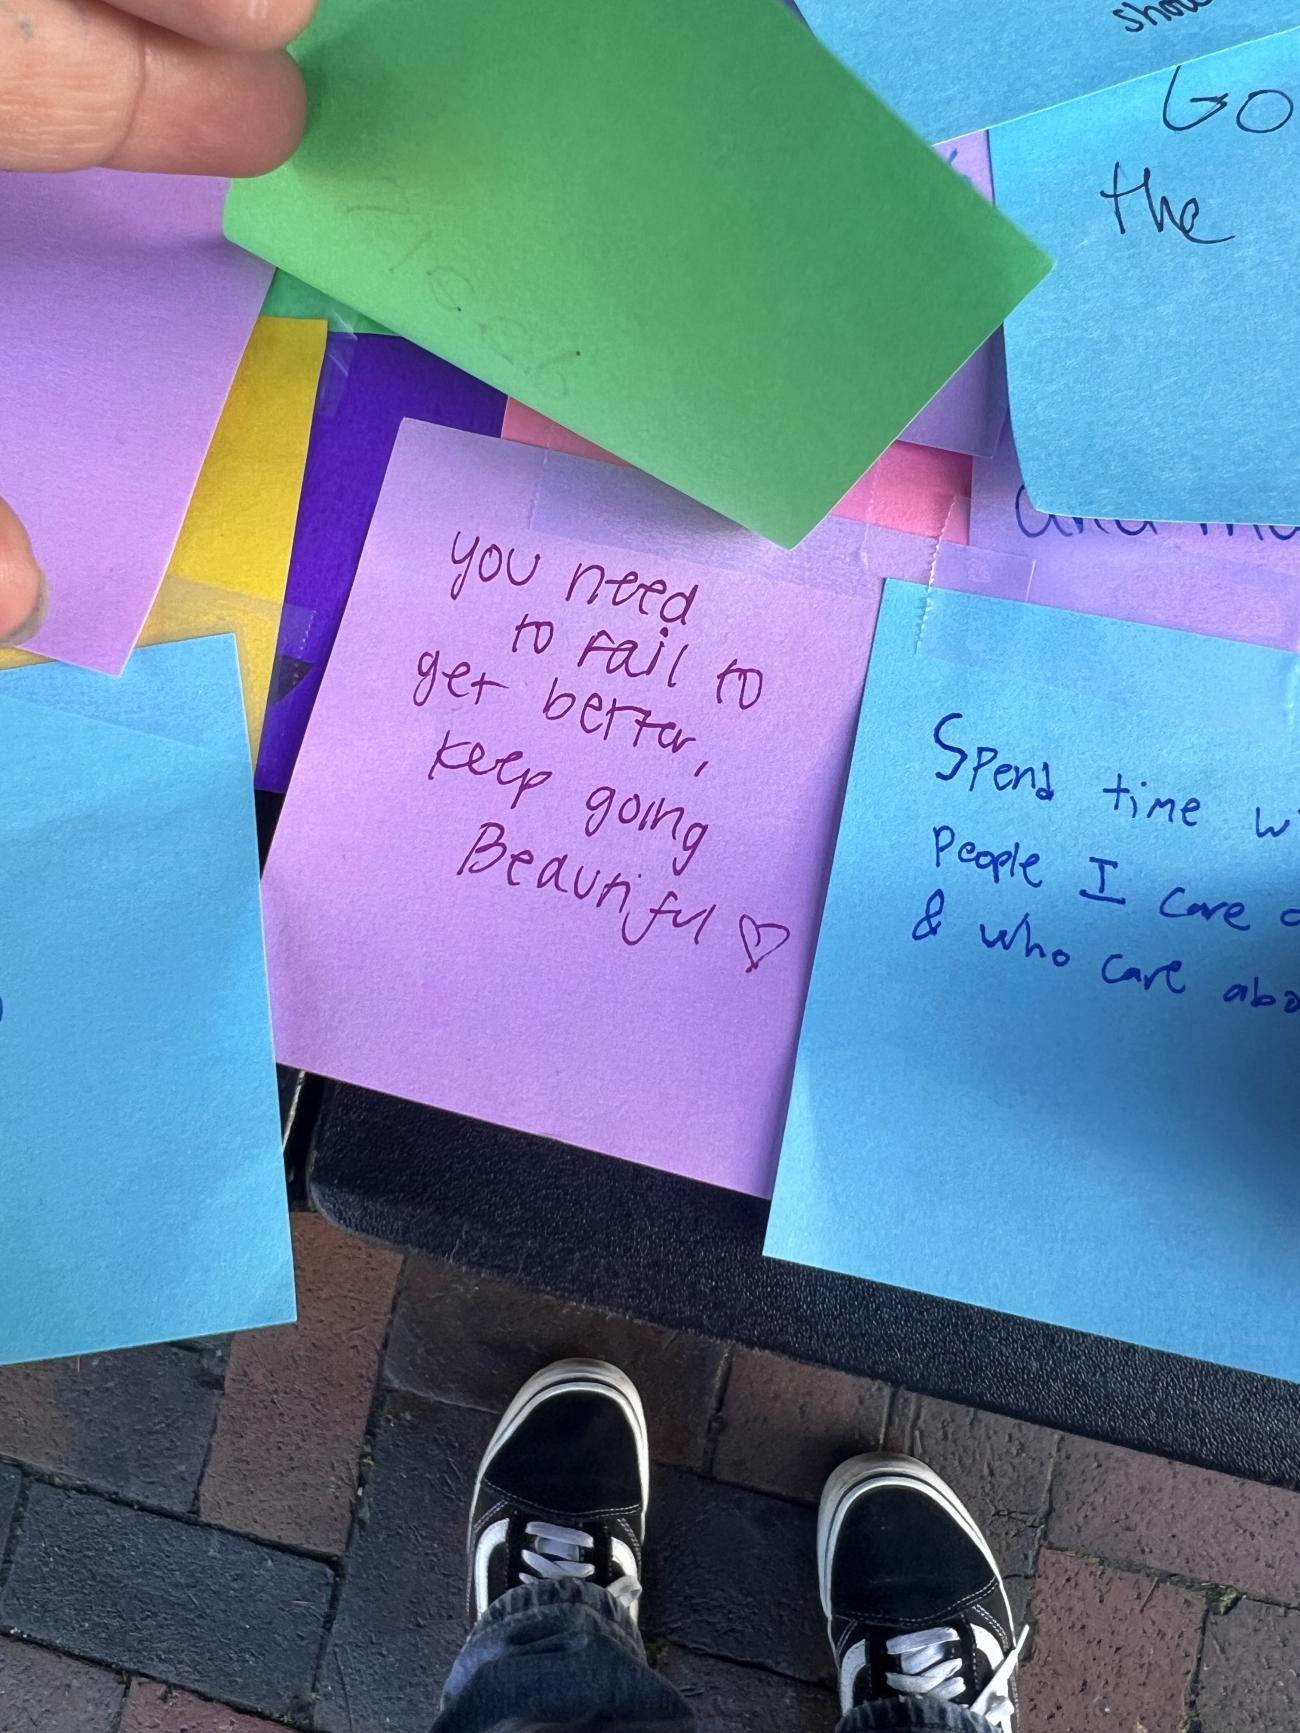 close up of stick notes with handwritten notes written on them, the one in the center says 'you need to fail to get better, keep going beautiful'